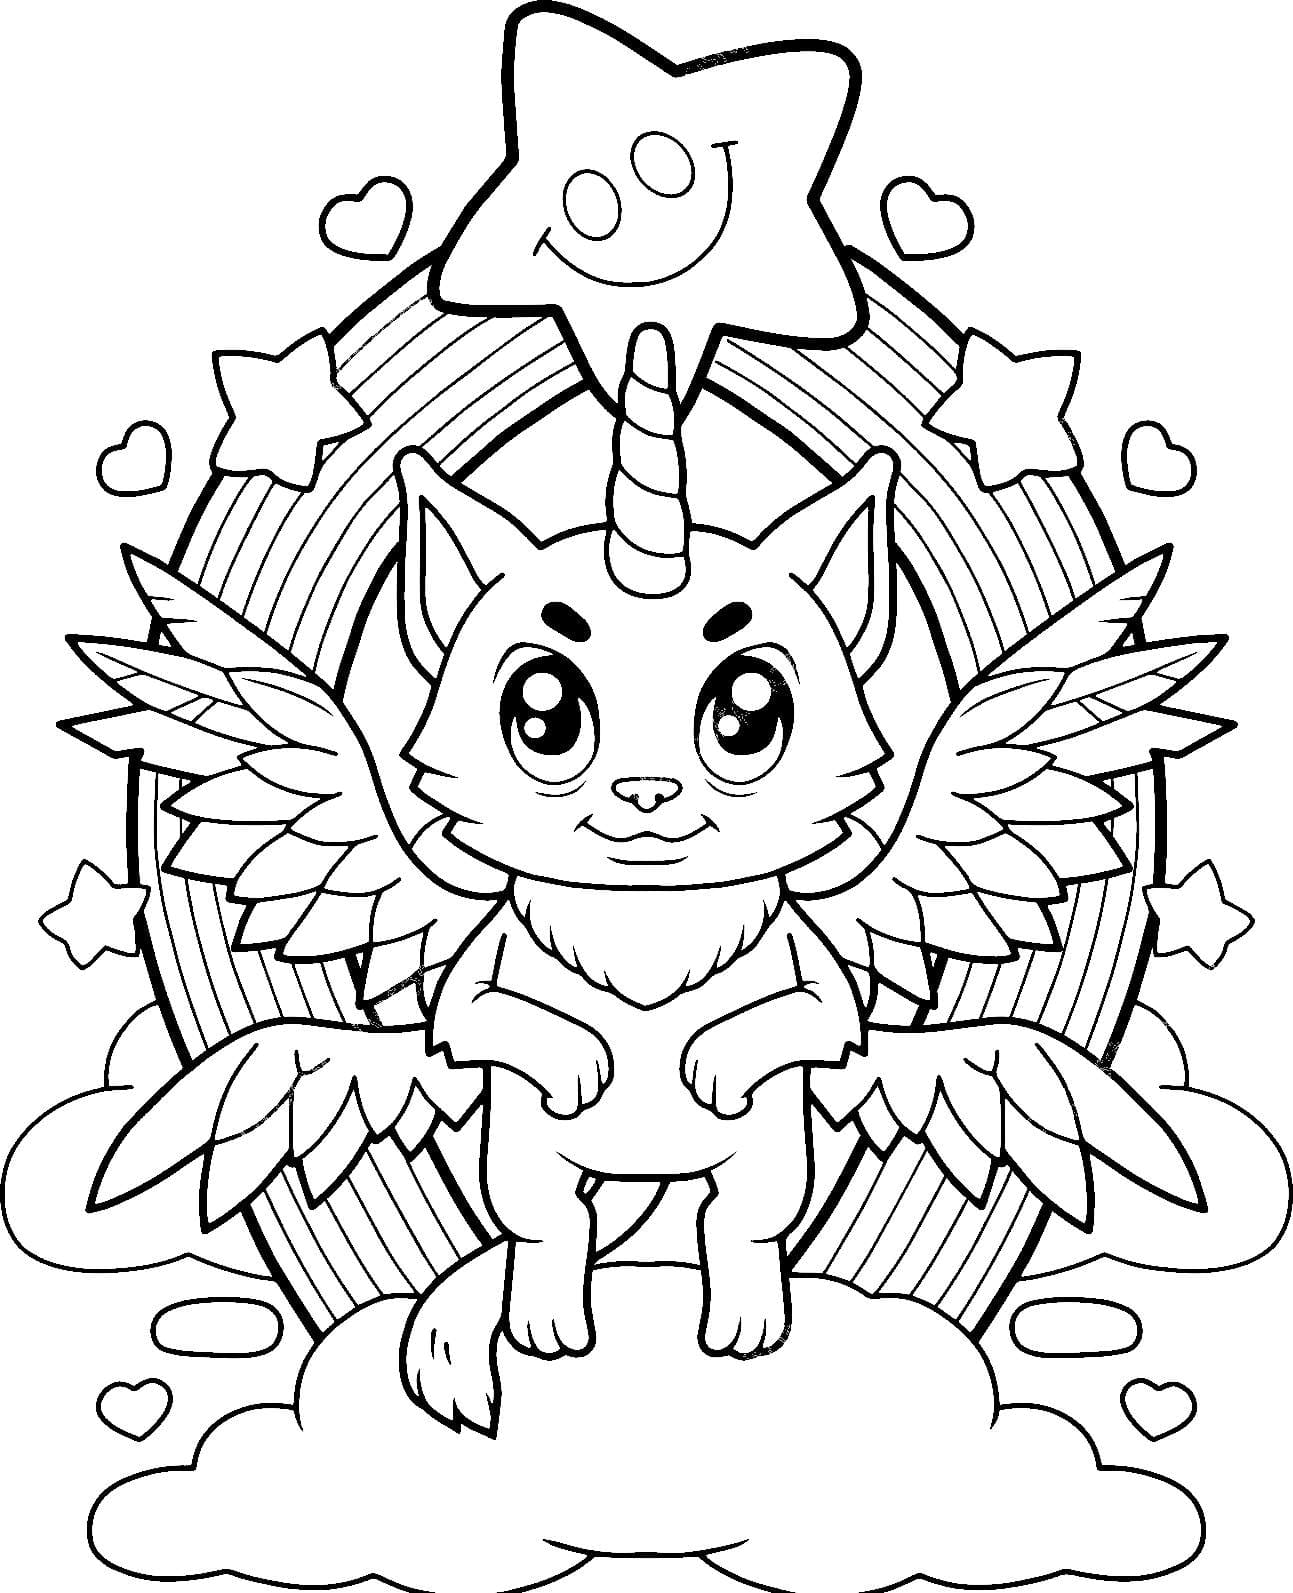 Coloring page Unicorn Cat with wings